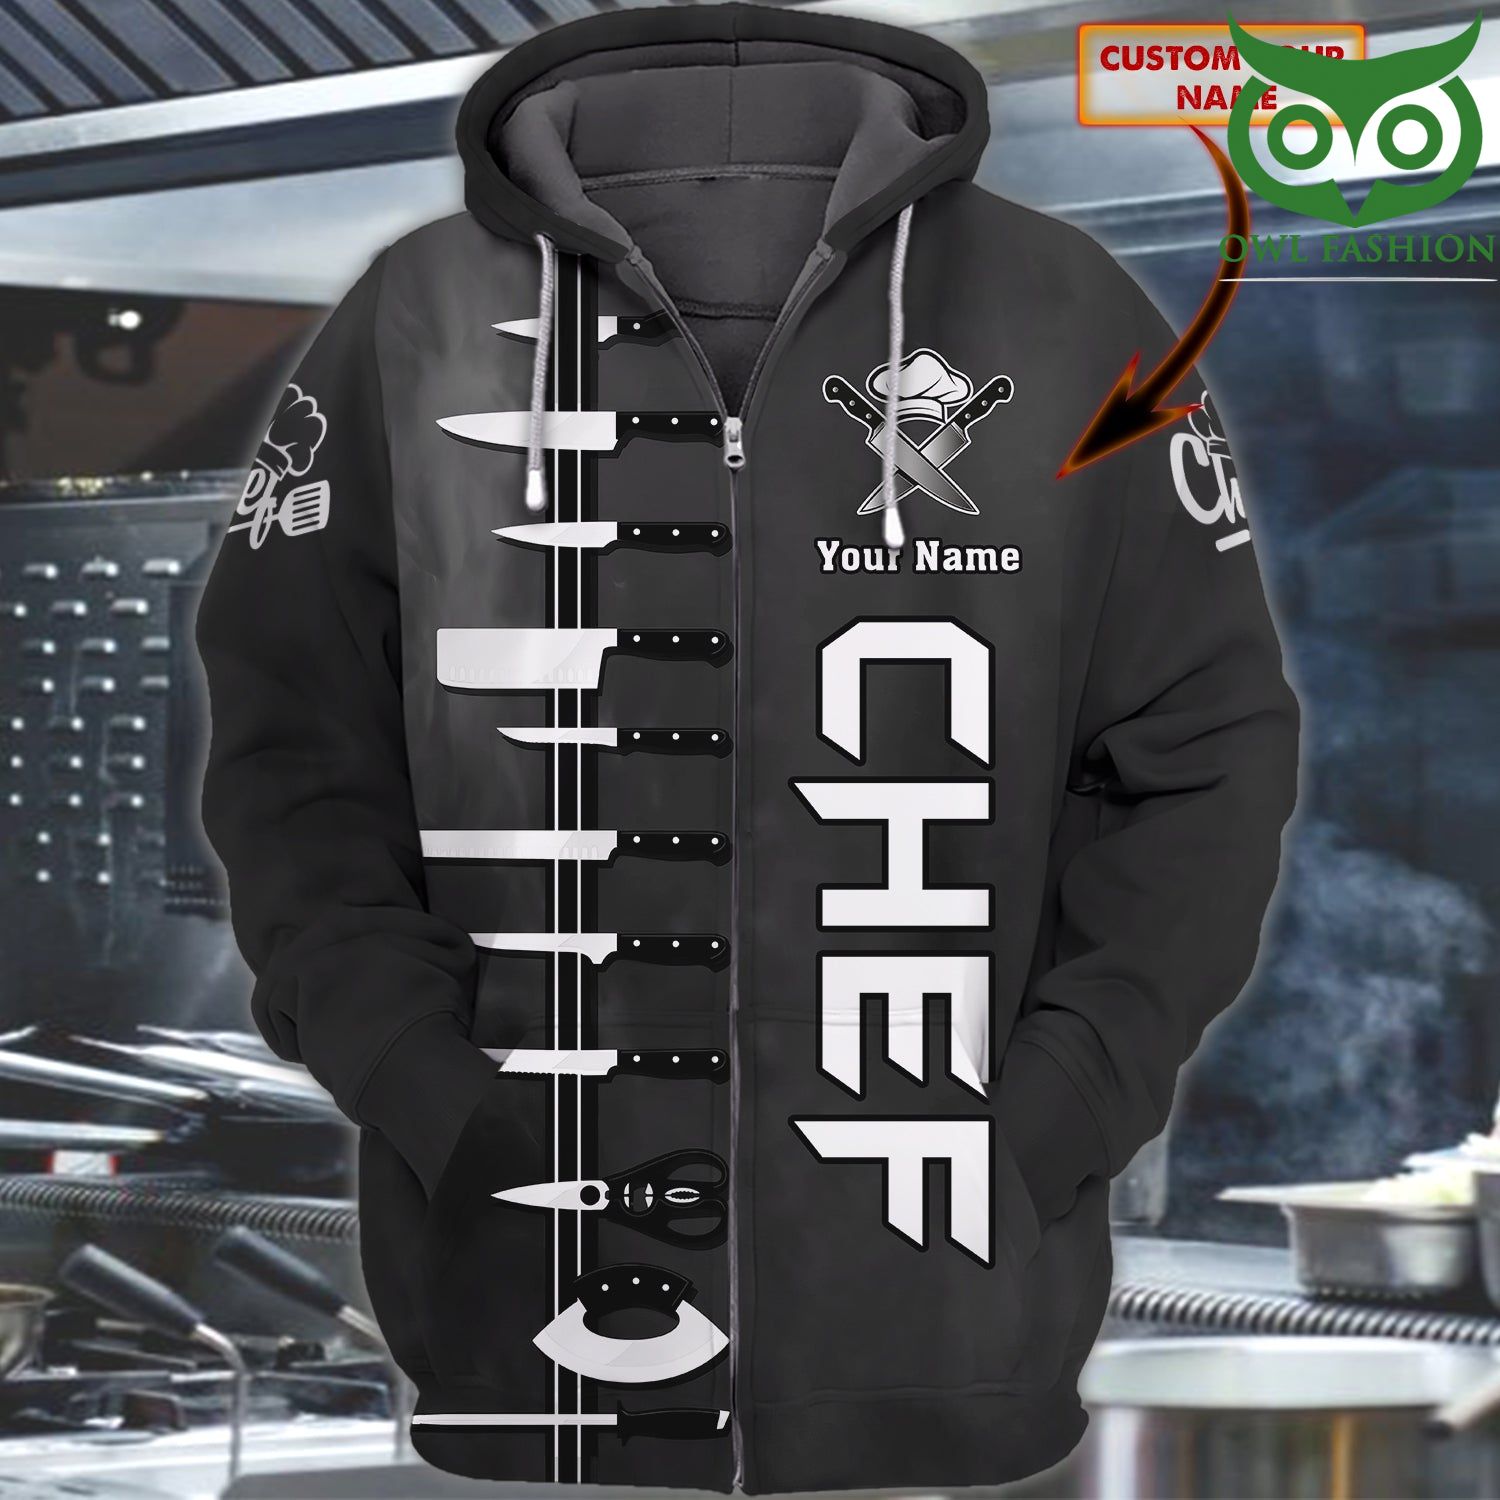 CHEF Personalized Name with knives grey 3D Zipper Hoodie